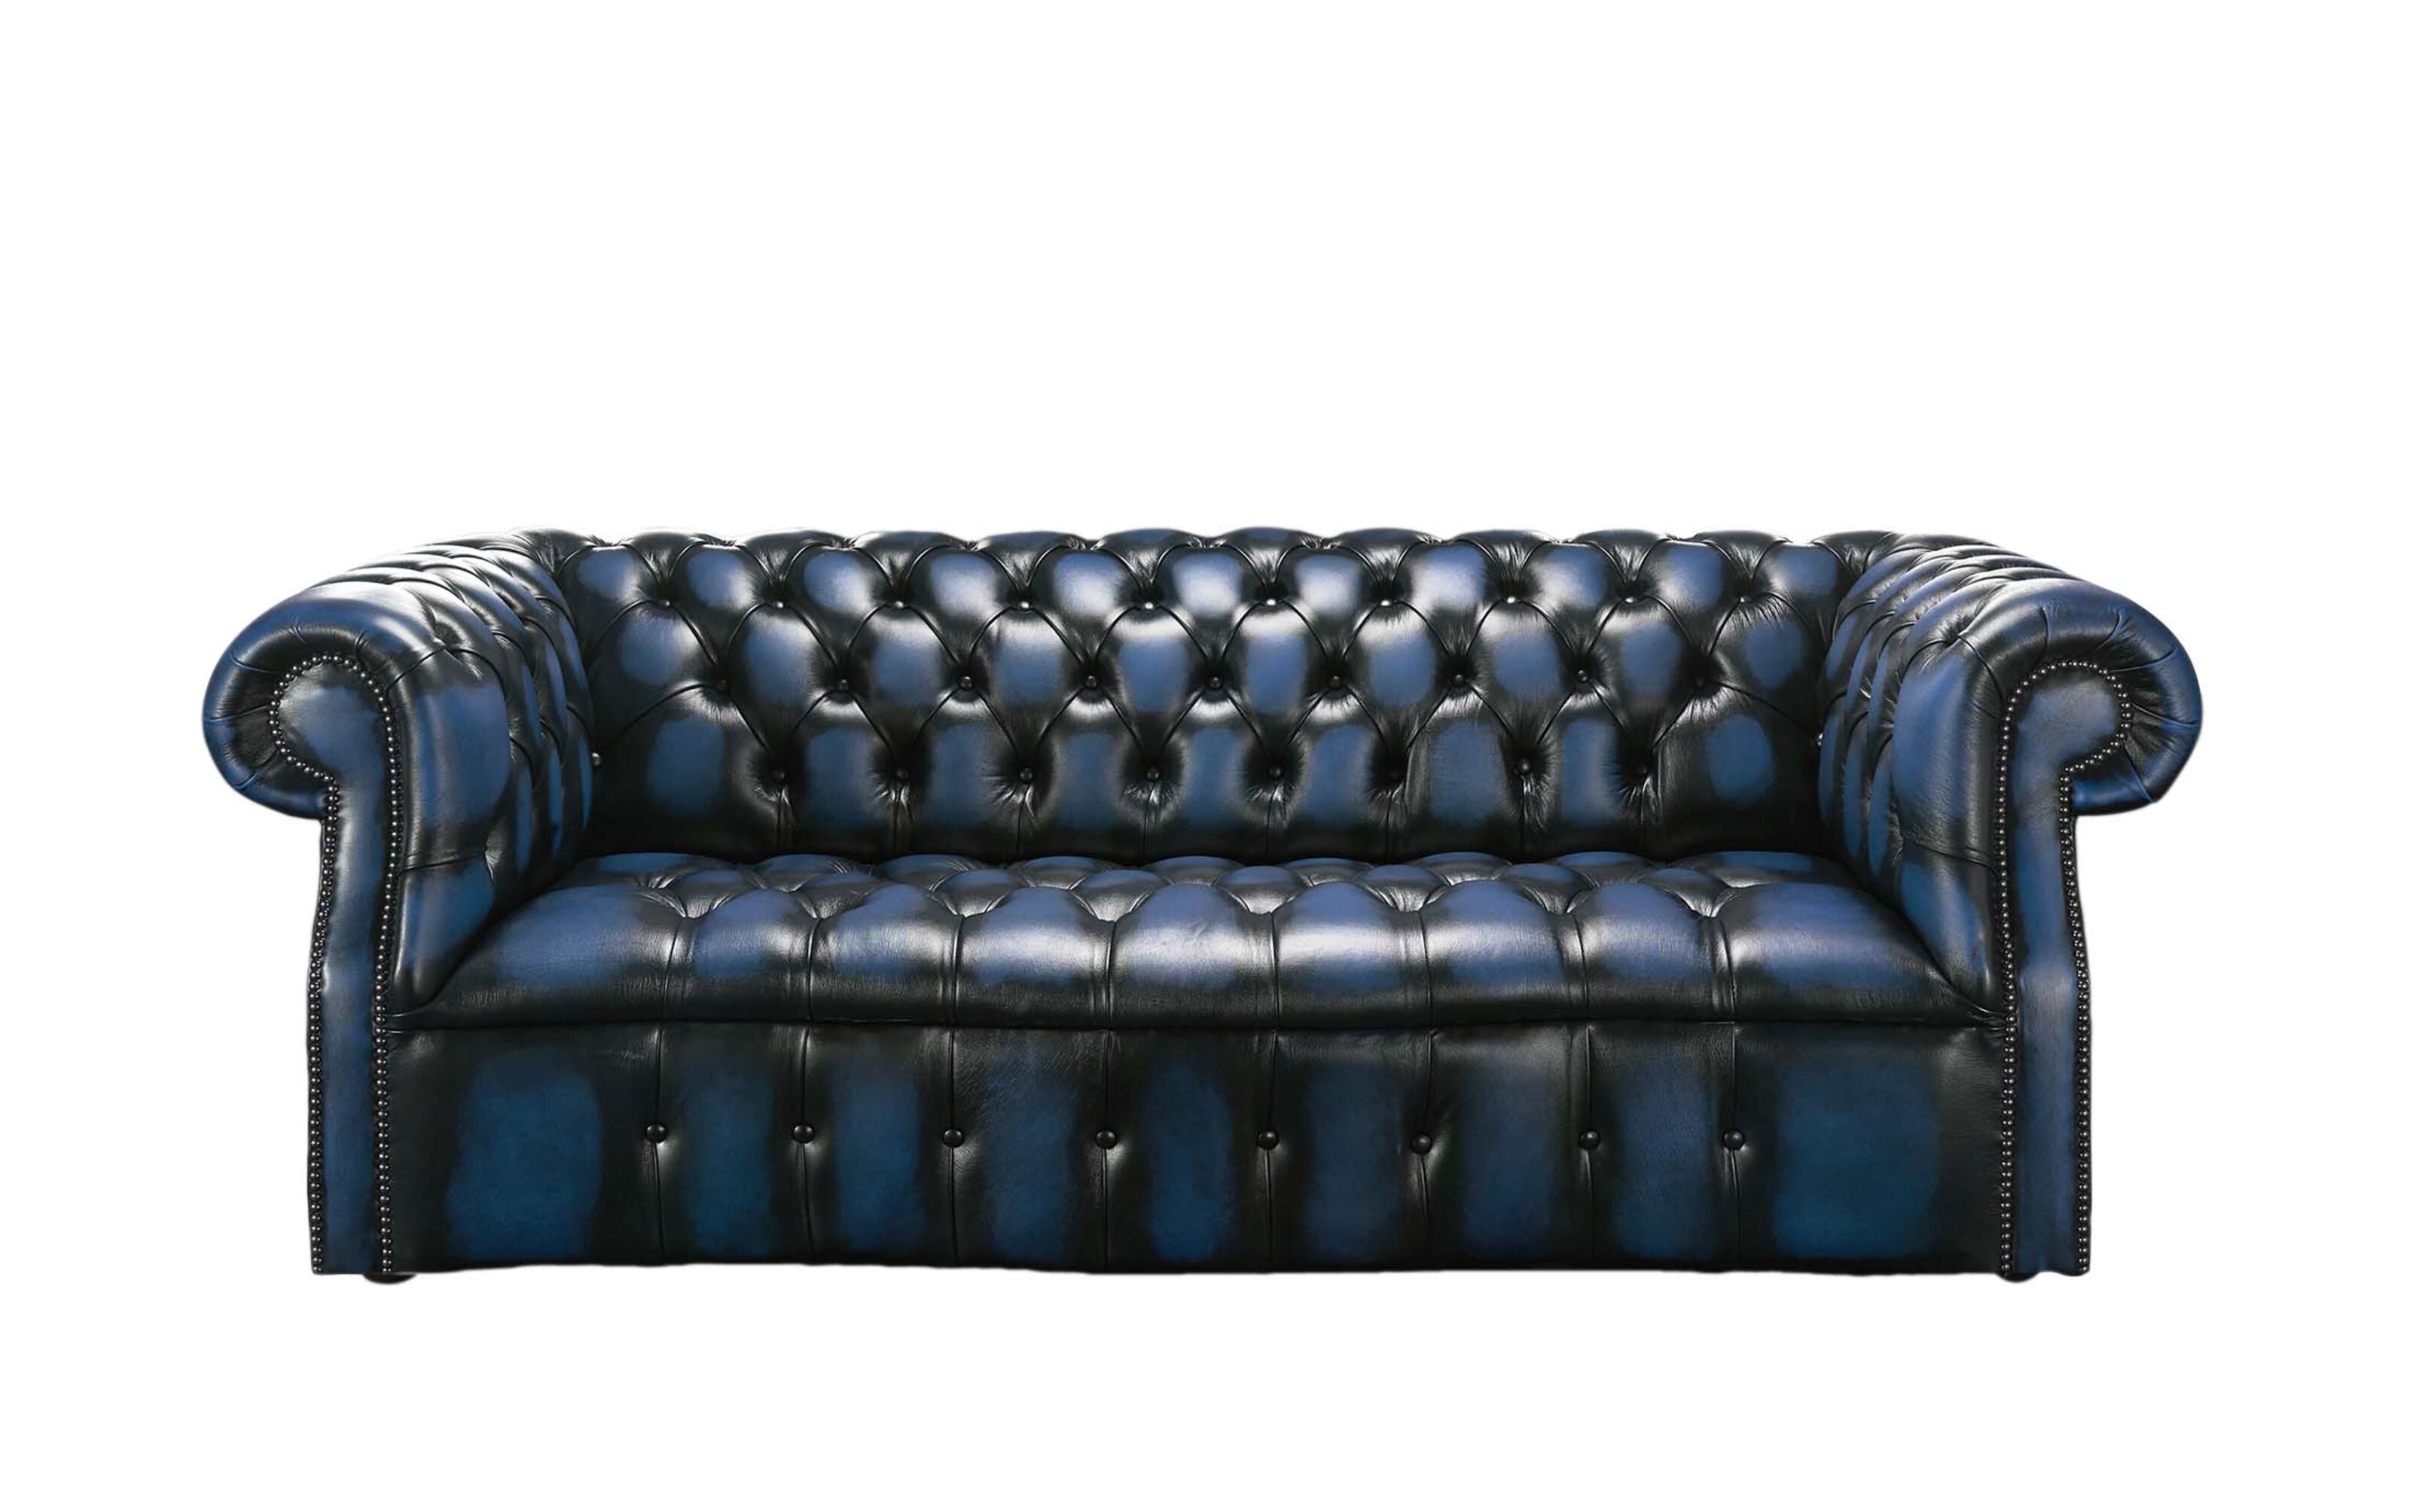 Flexible Payments on Chesterfield Sofas with Klarna  %Post Title